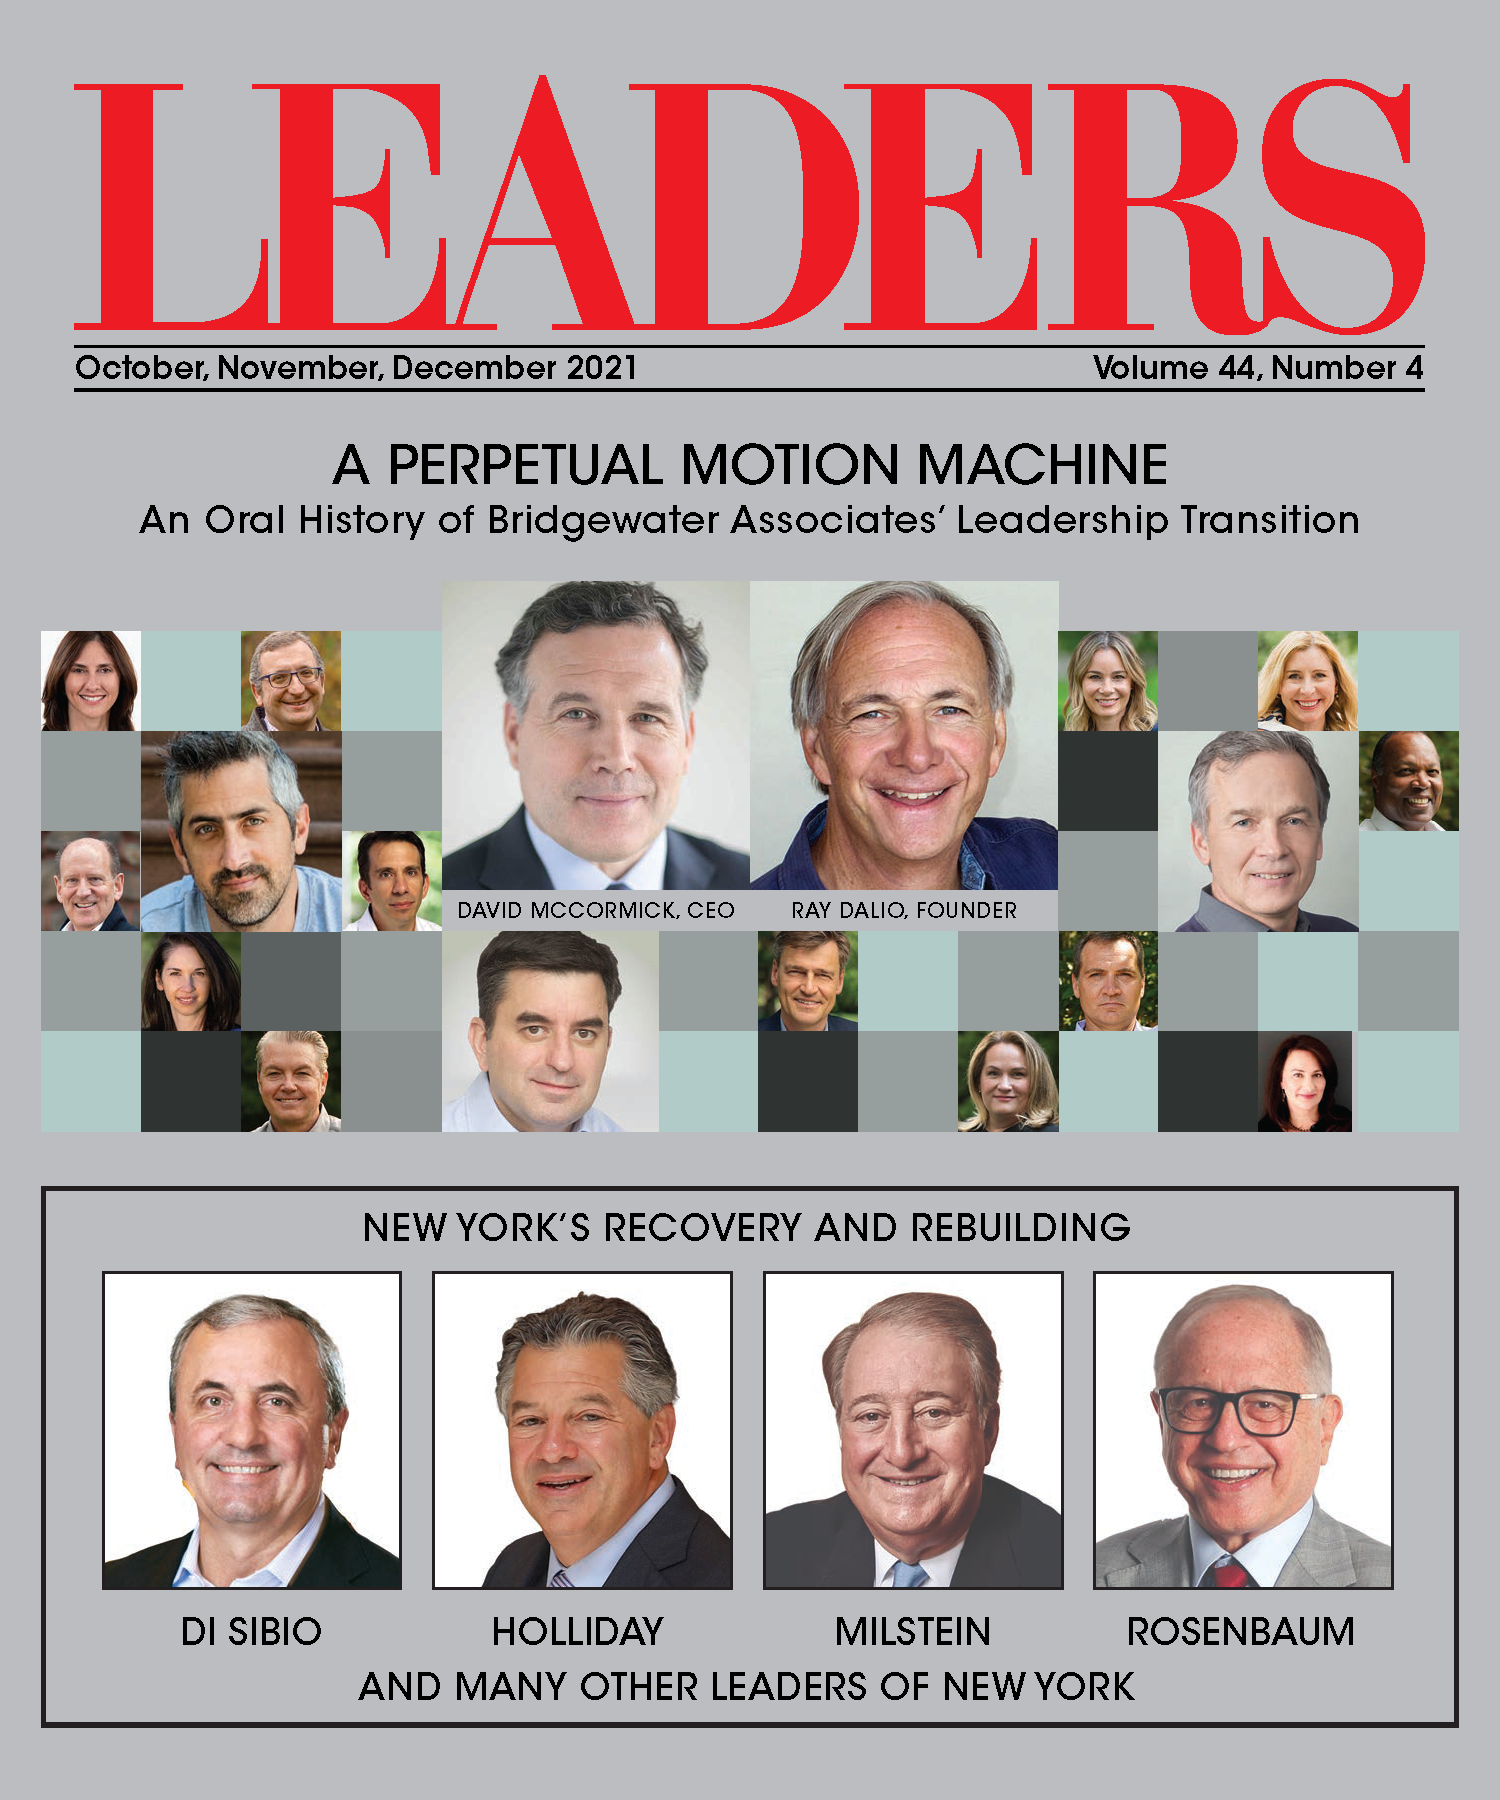 LEADERS Cover